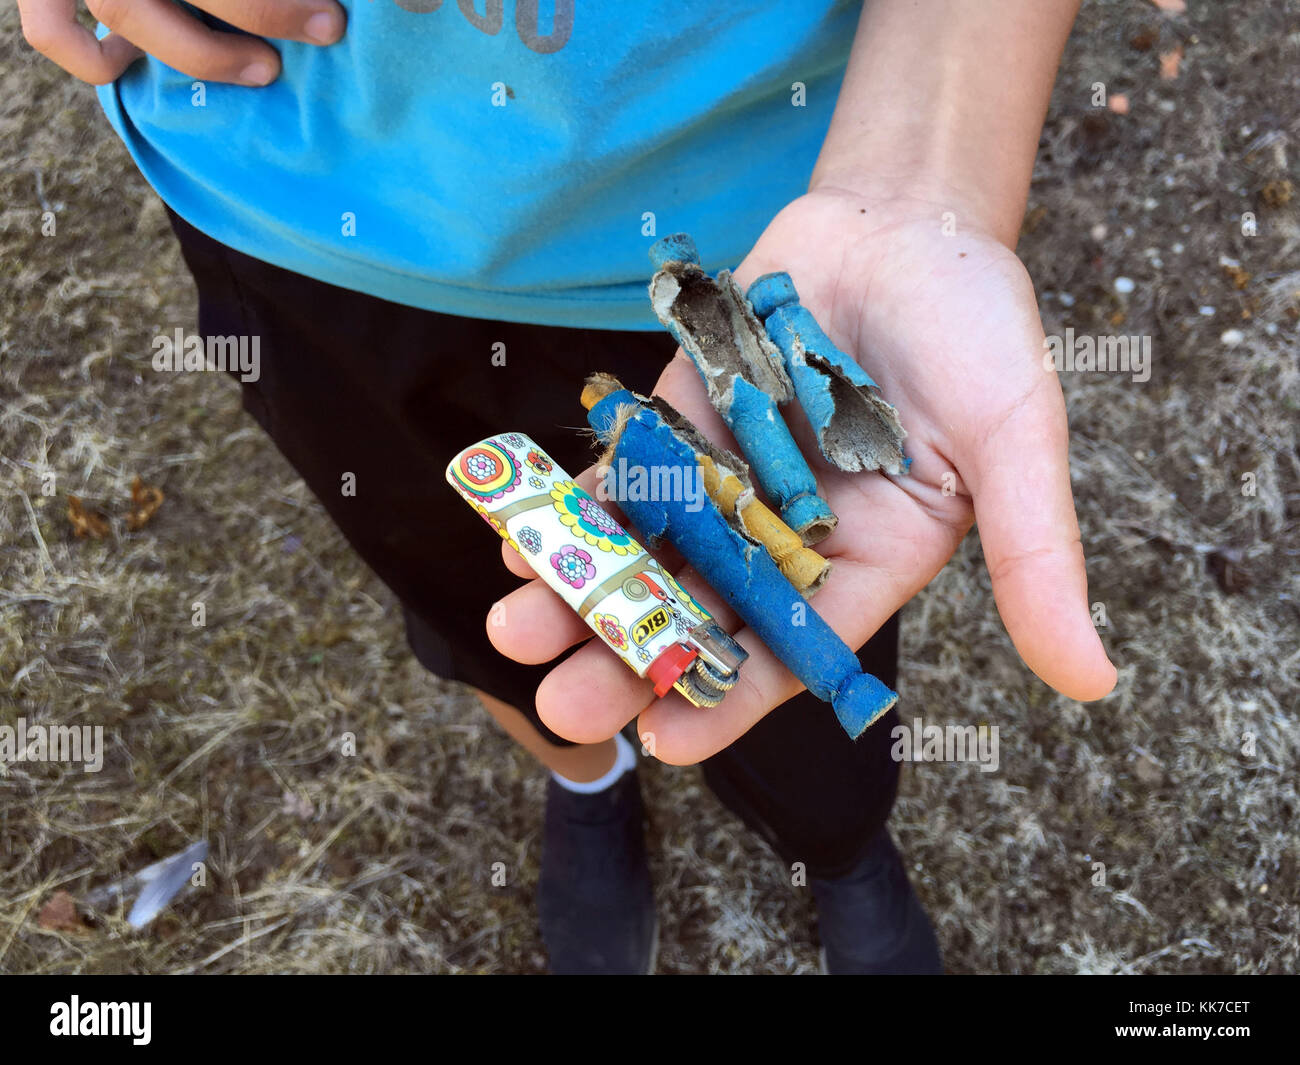 Young boy showing a lighter & used crackers Stock Photo